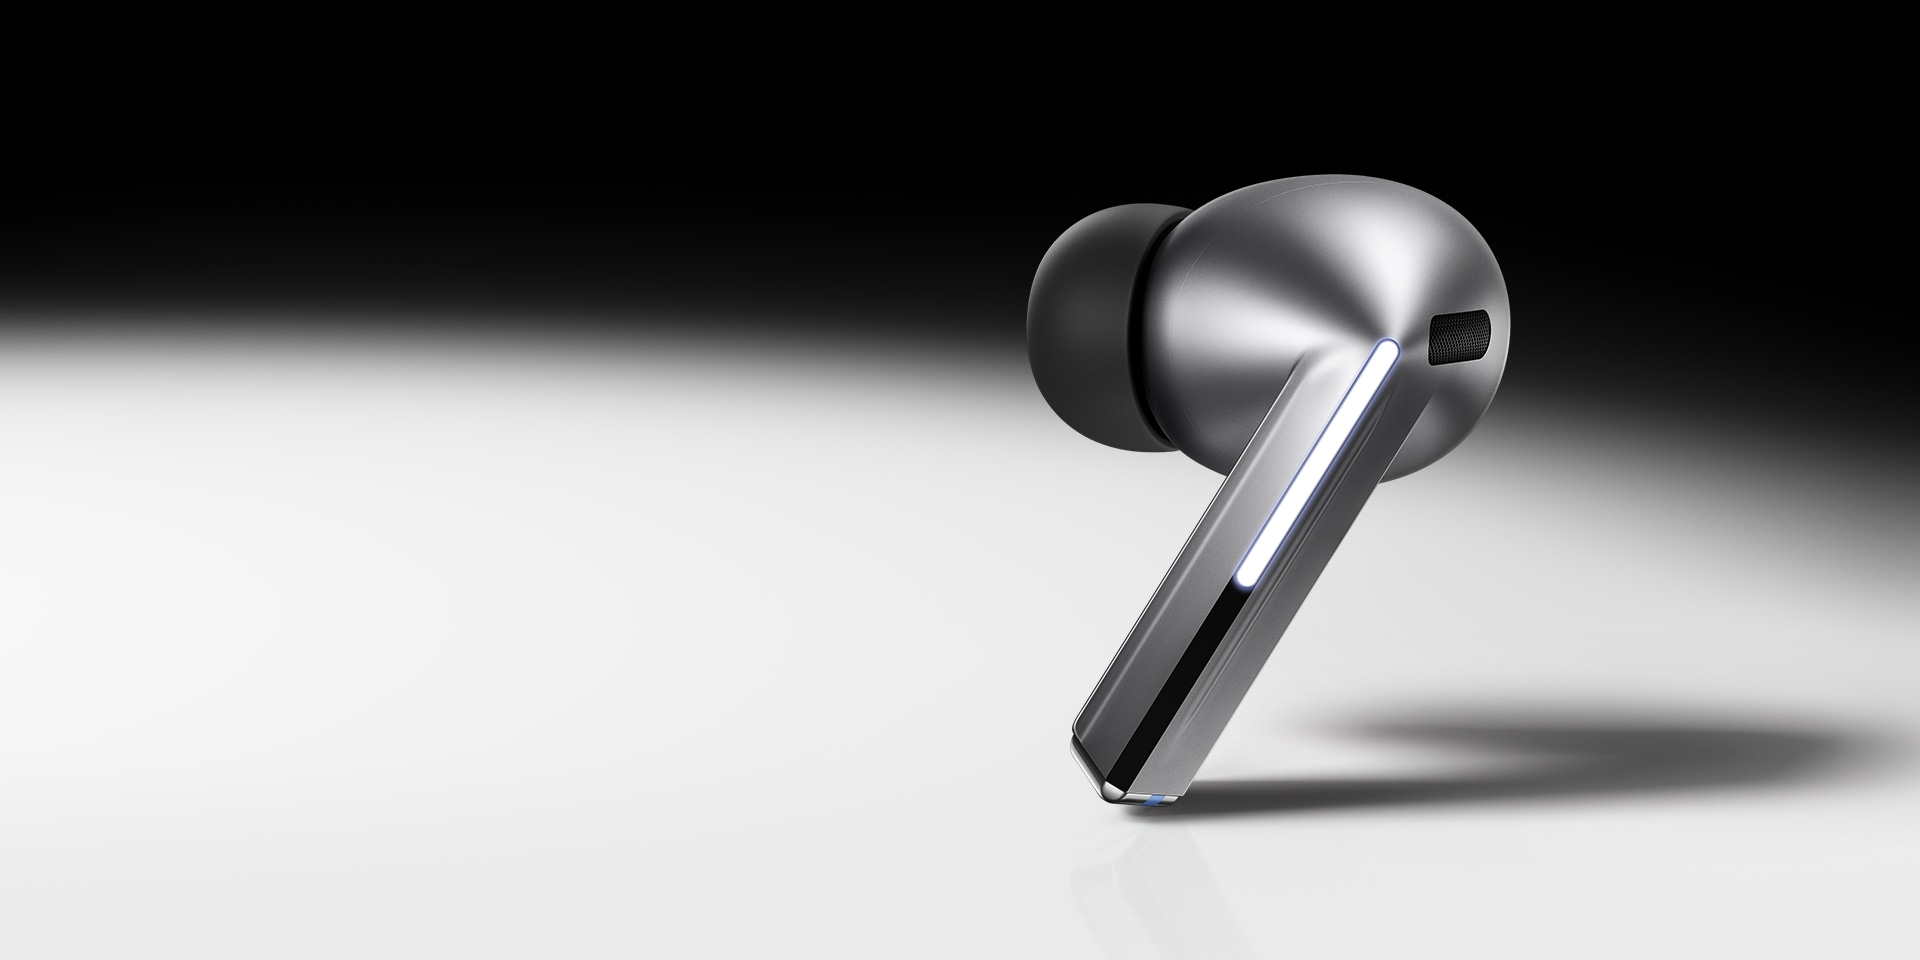 A single, silver colored Samsung Galaxy Buds3 Pro earbud on a black and white gradient background.